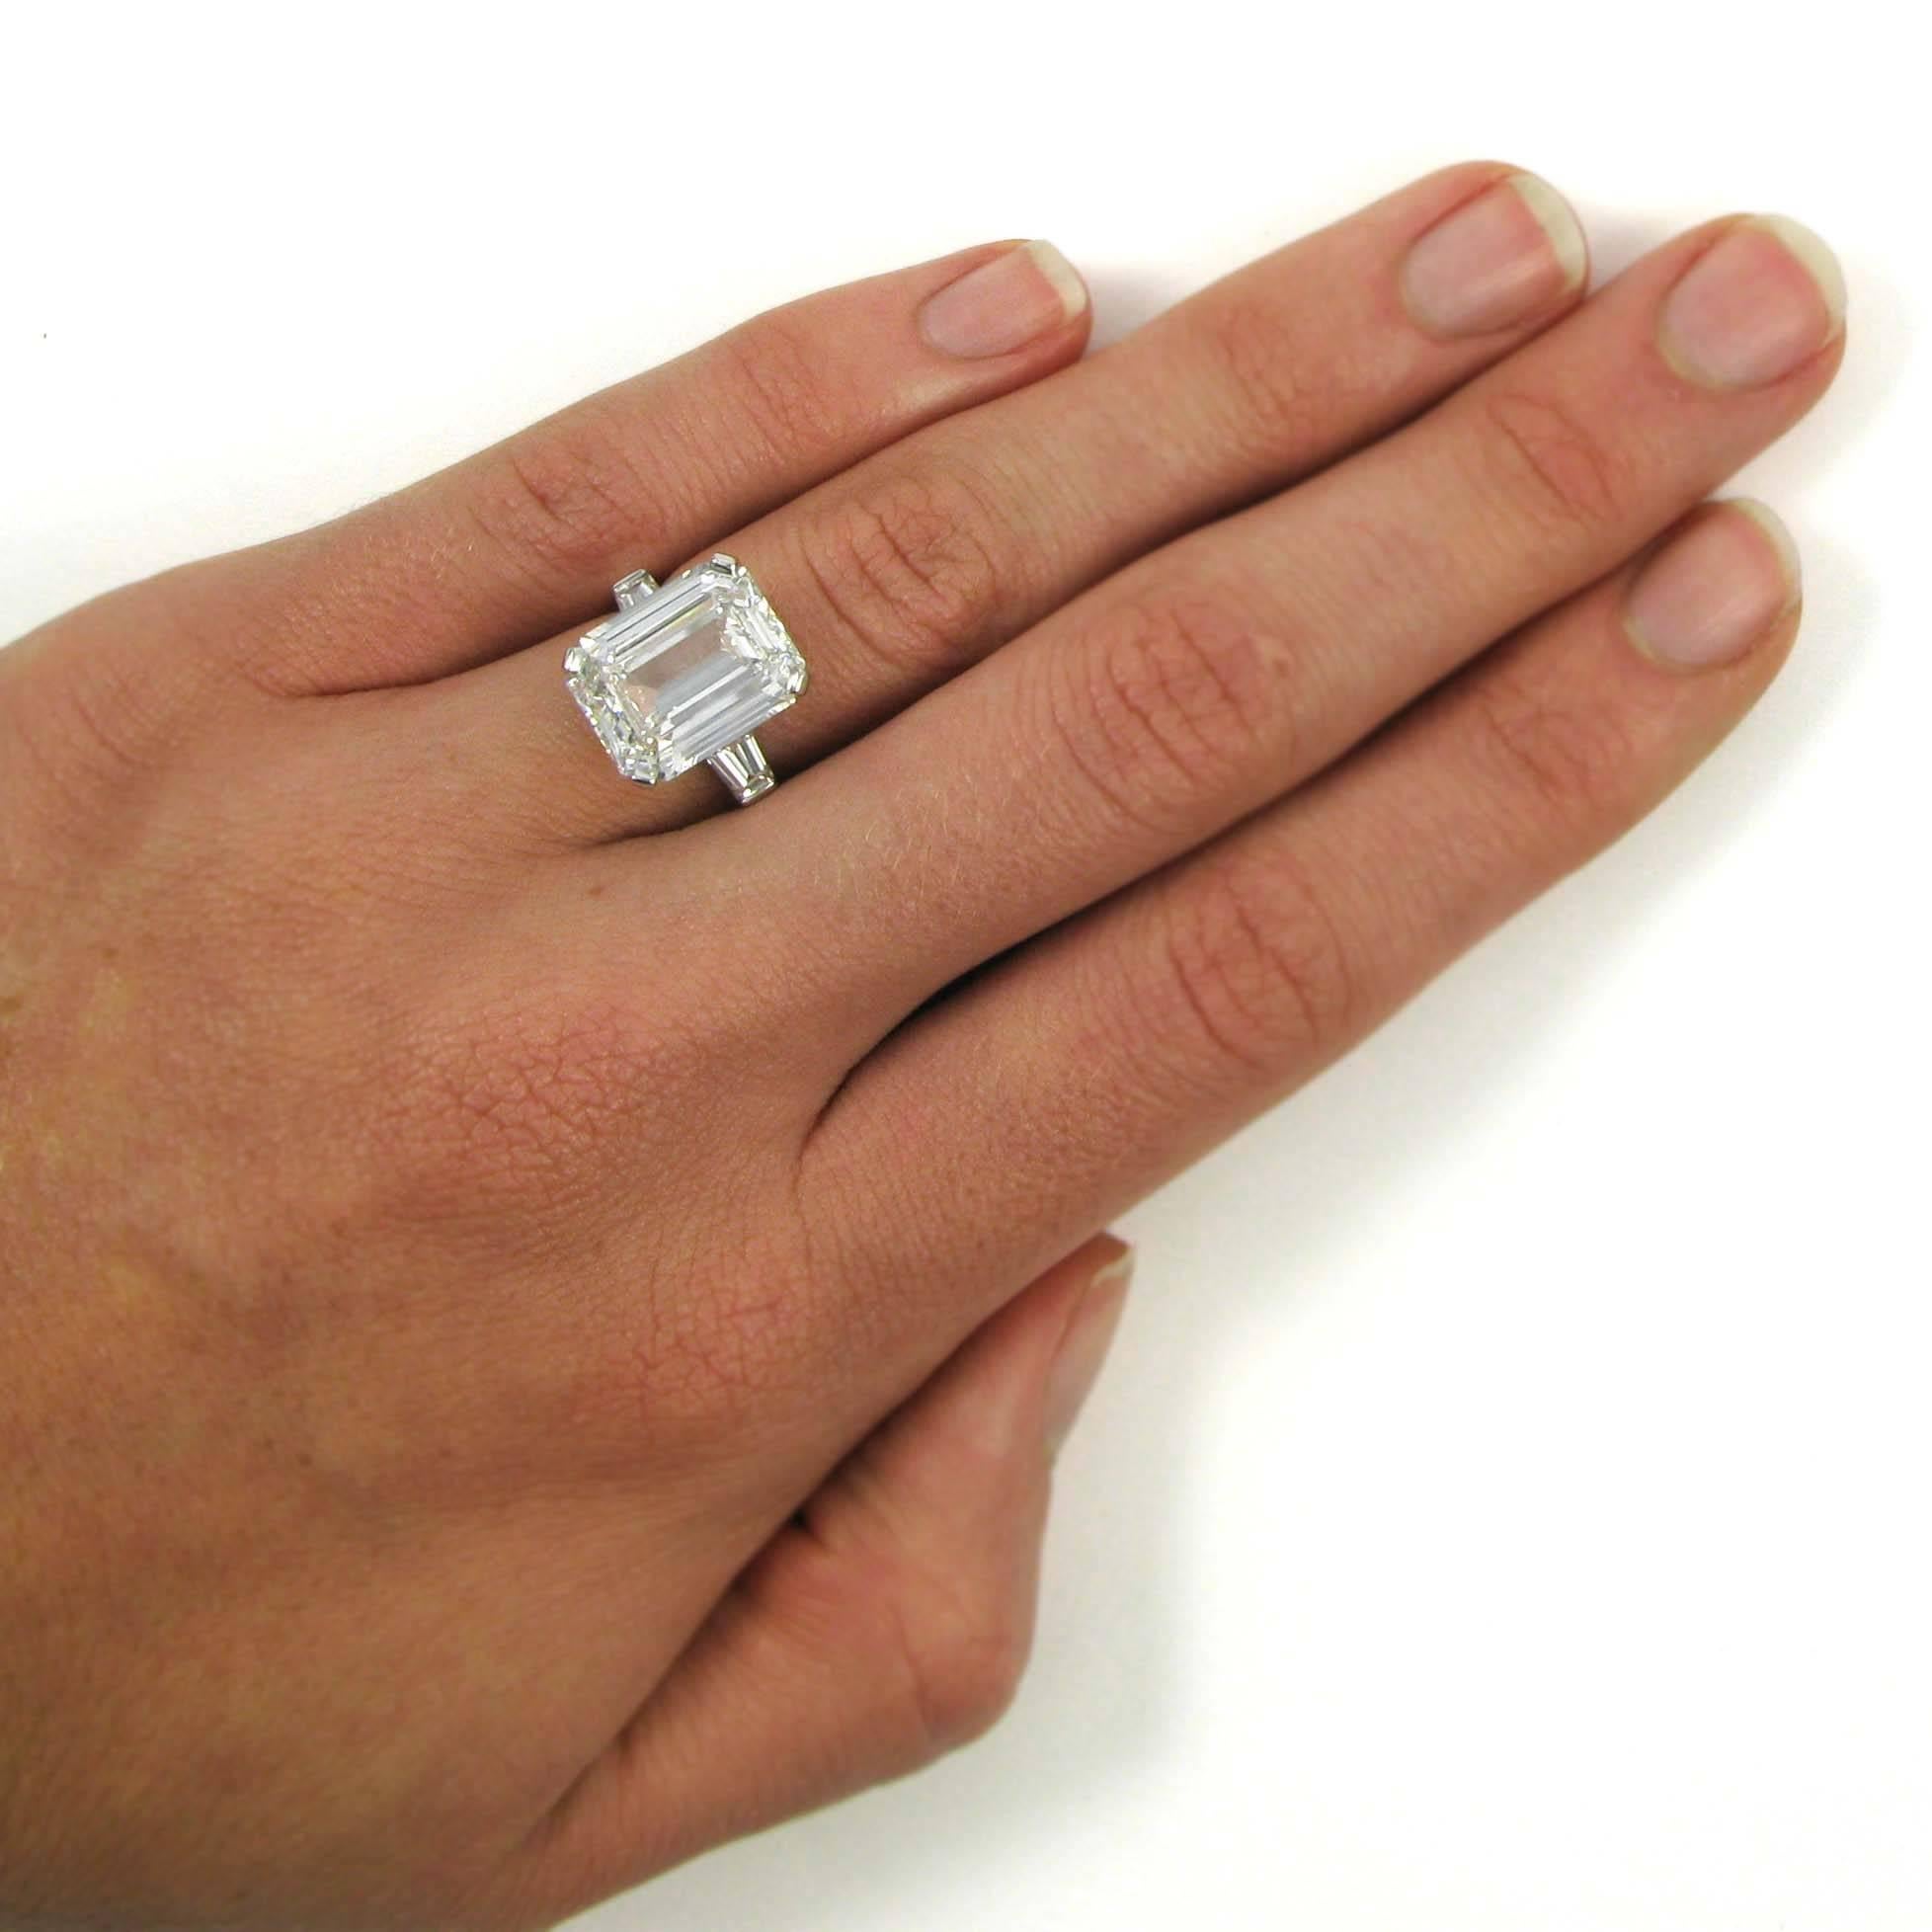 This massive-looking 7.57 carat emerald cut diamond has G color and VS1 clarity, and is flanked by two tapered baguette-cut diamonds for a classic yet impressive look. Mounted in platinum. Side diamonds total approx. 0.50 carat, 

Purchase includes